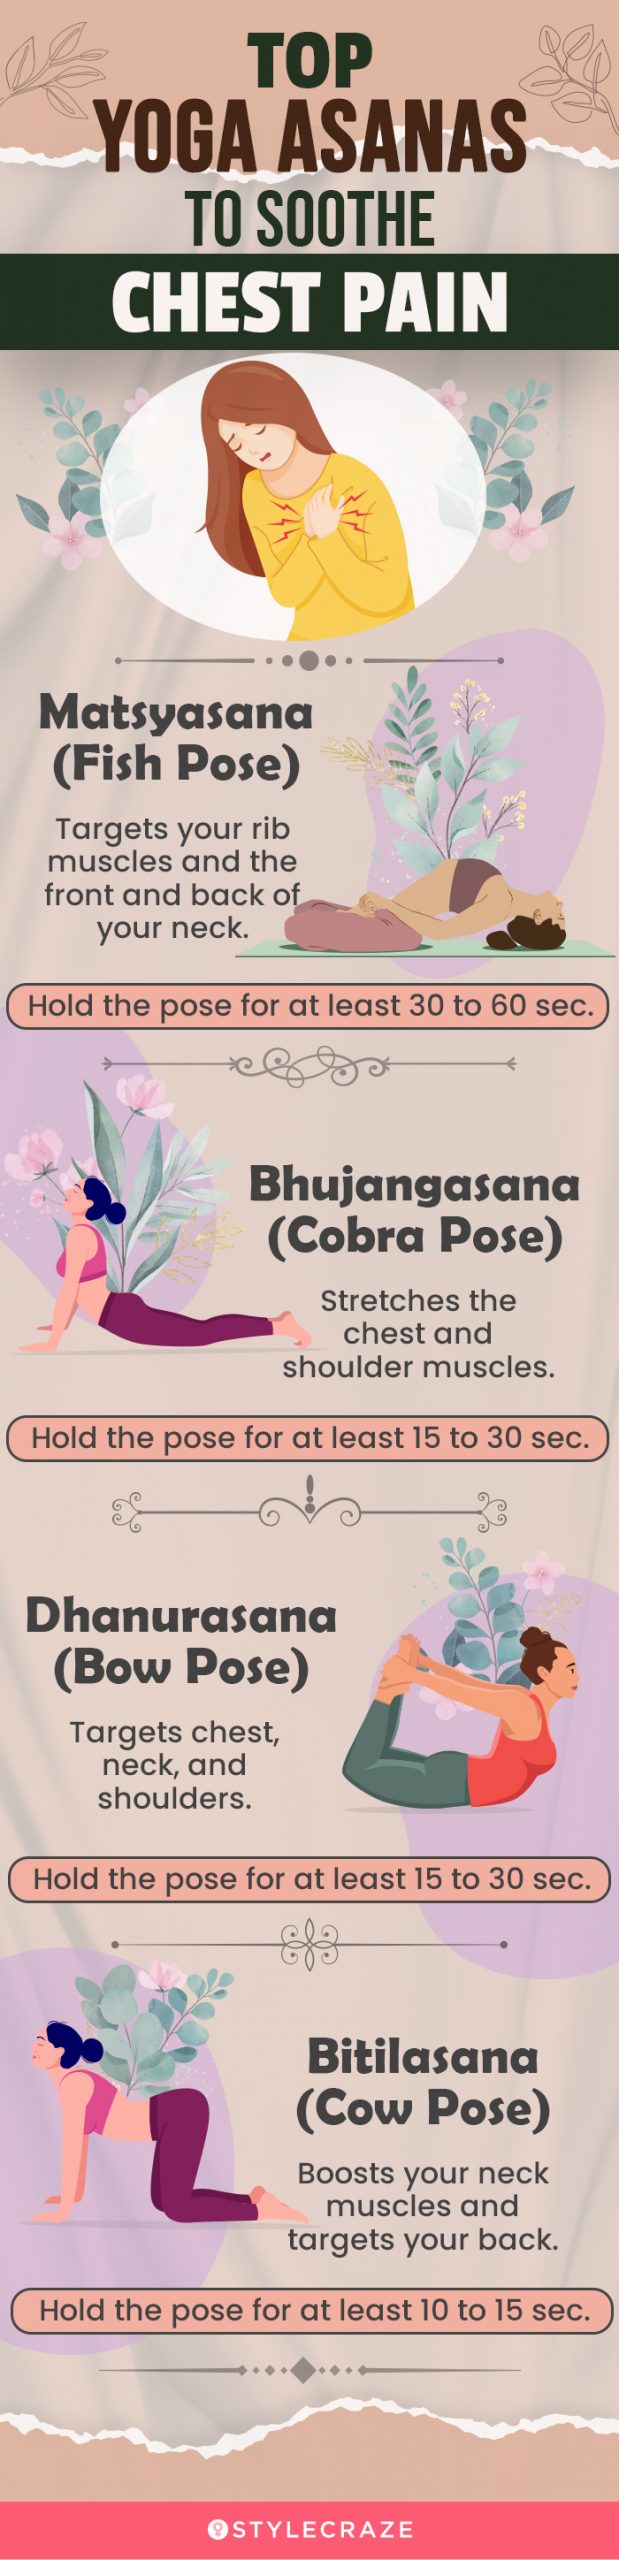 10 MINUTES OF YOGA IN MORNING THAT WILL EASE YOU INTO YOUR DAY